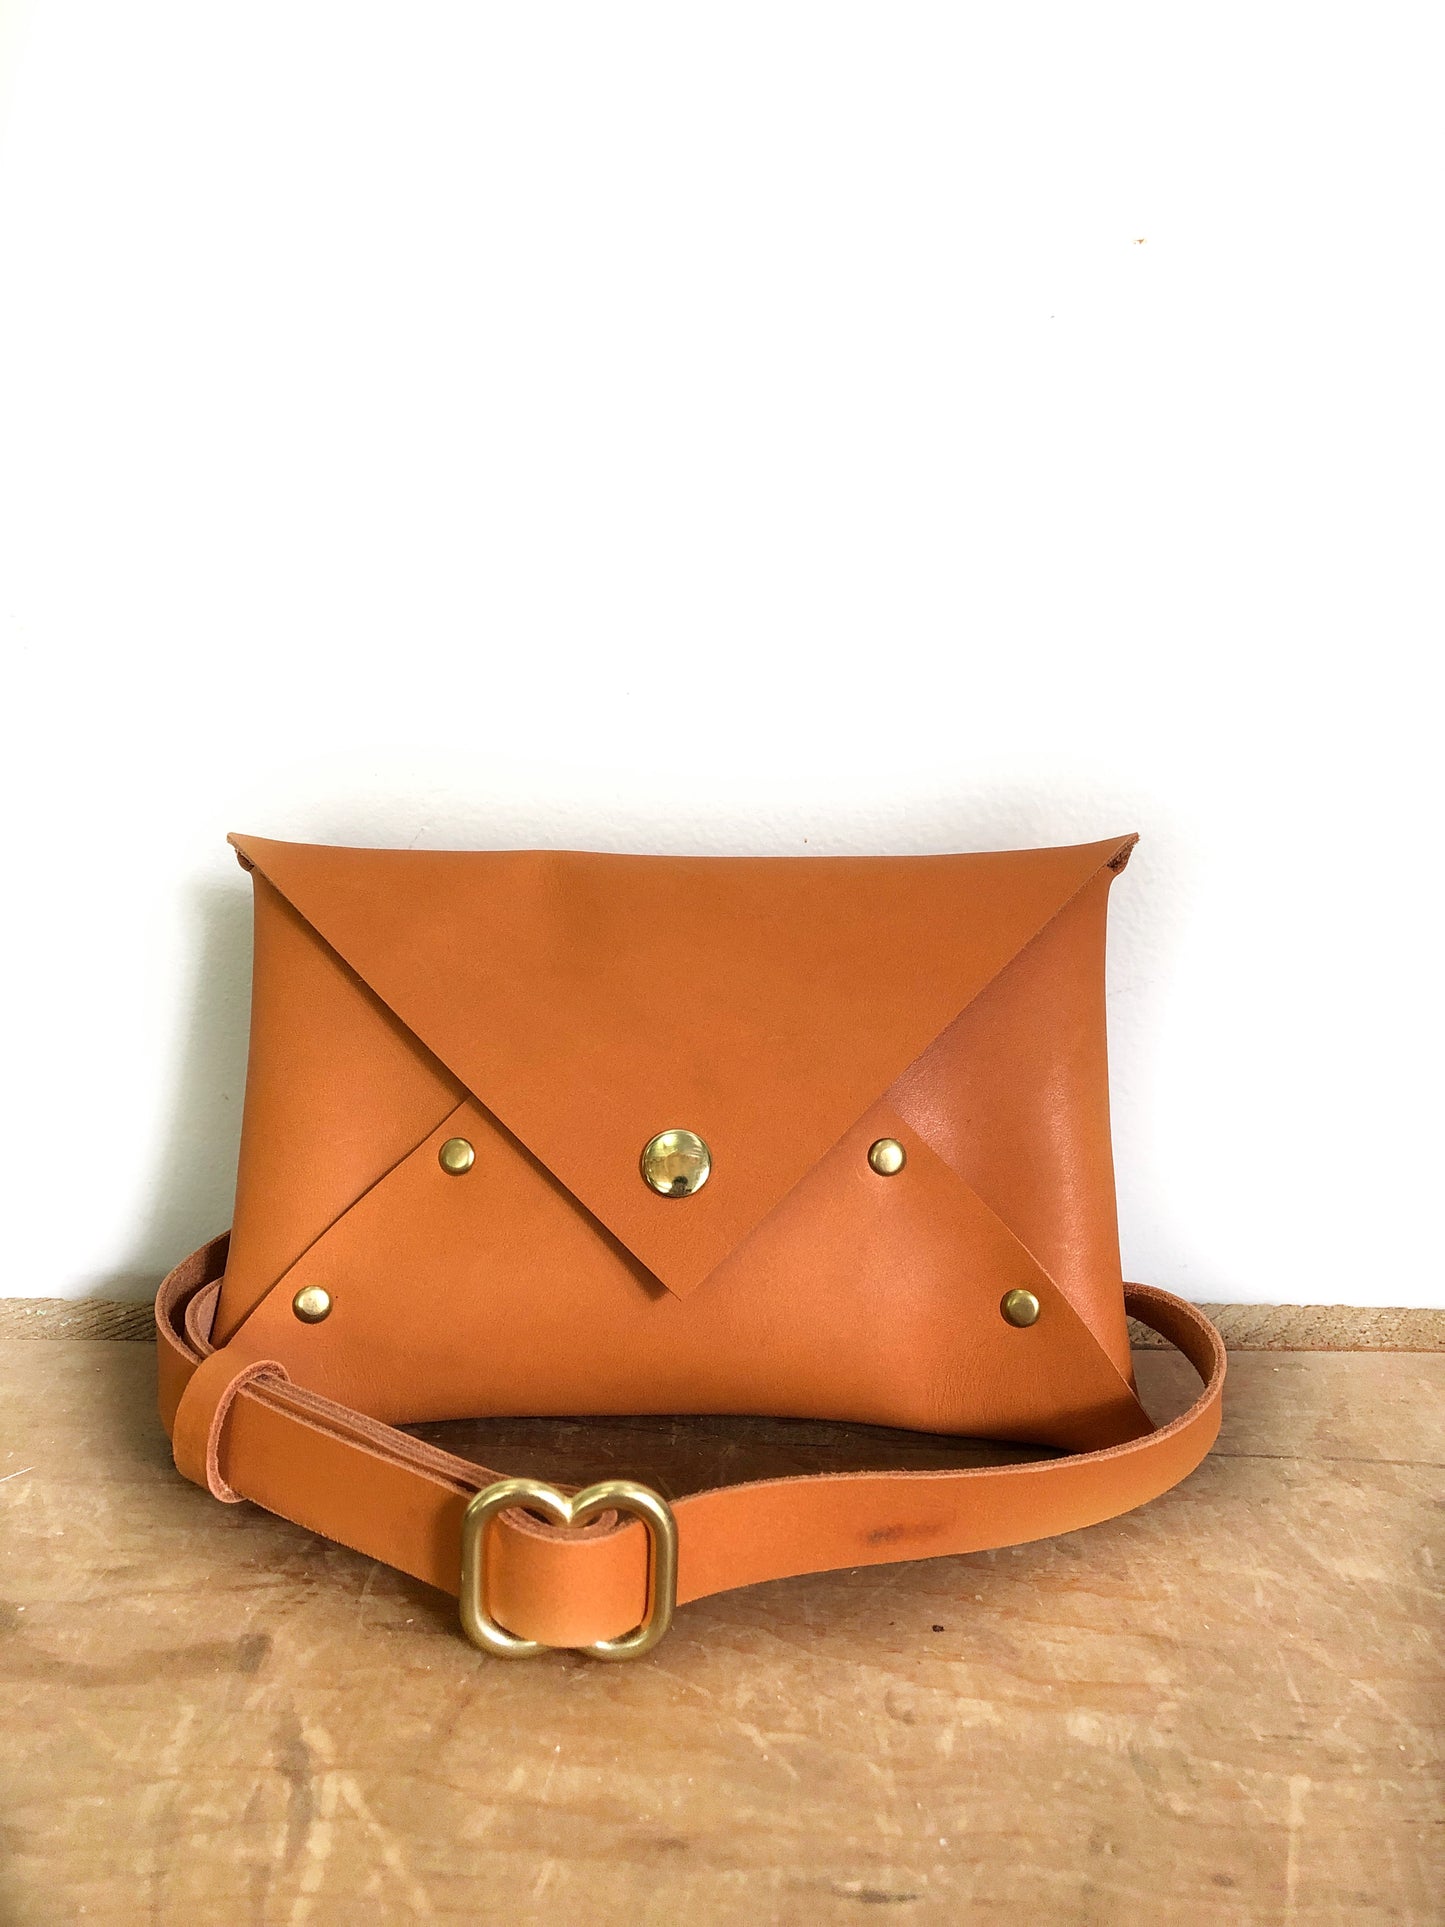 Tan hip bag in vegetable tanned leather